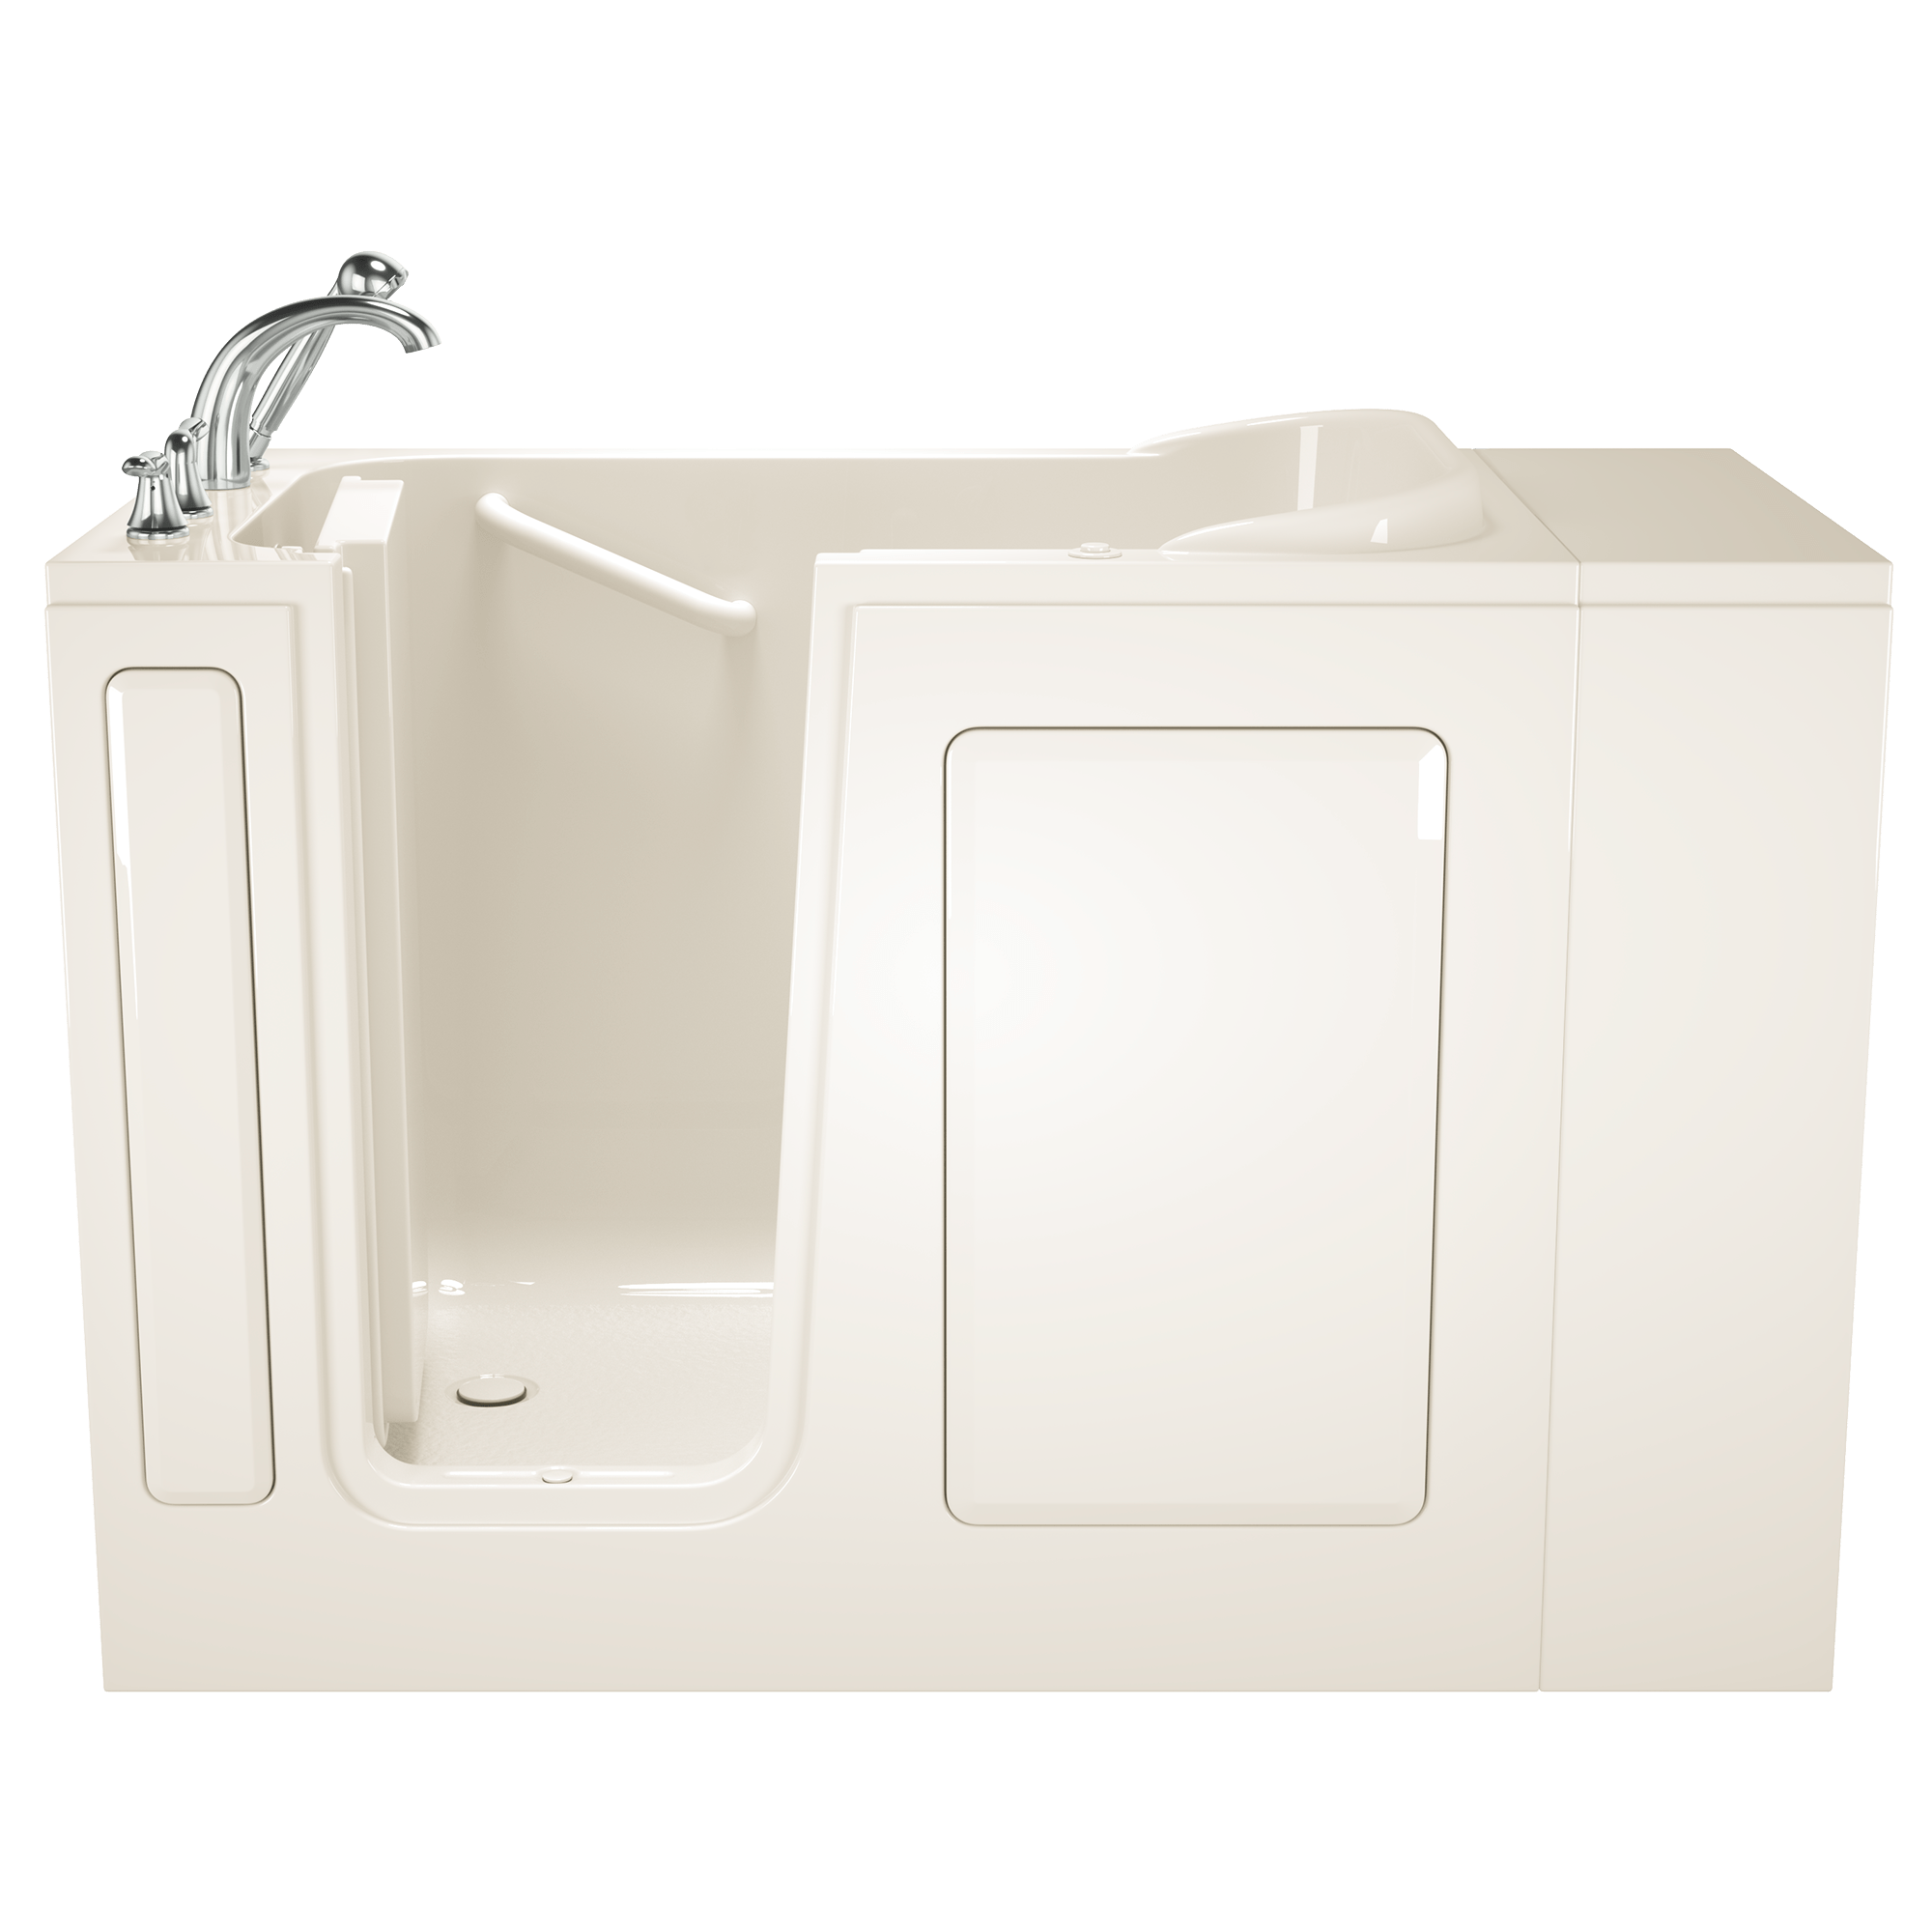 Gelcoat Entry Series 48 x 28 Inch Walk In Tub With Air Spa System - Left Hand Drain With Faucet ST BISCUIT